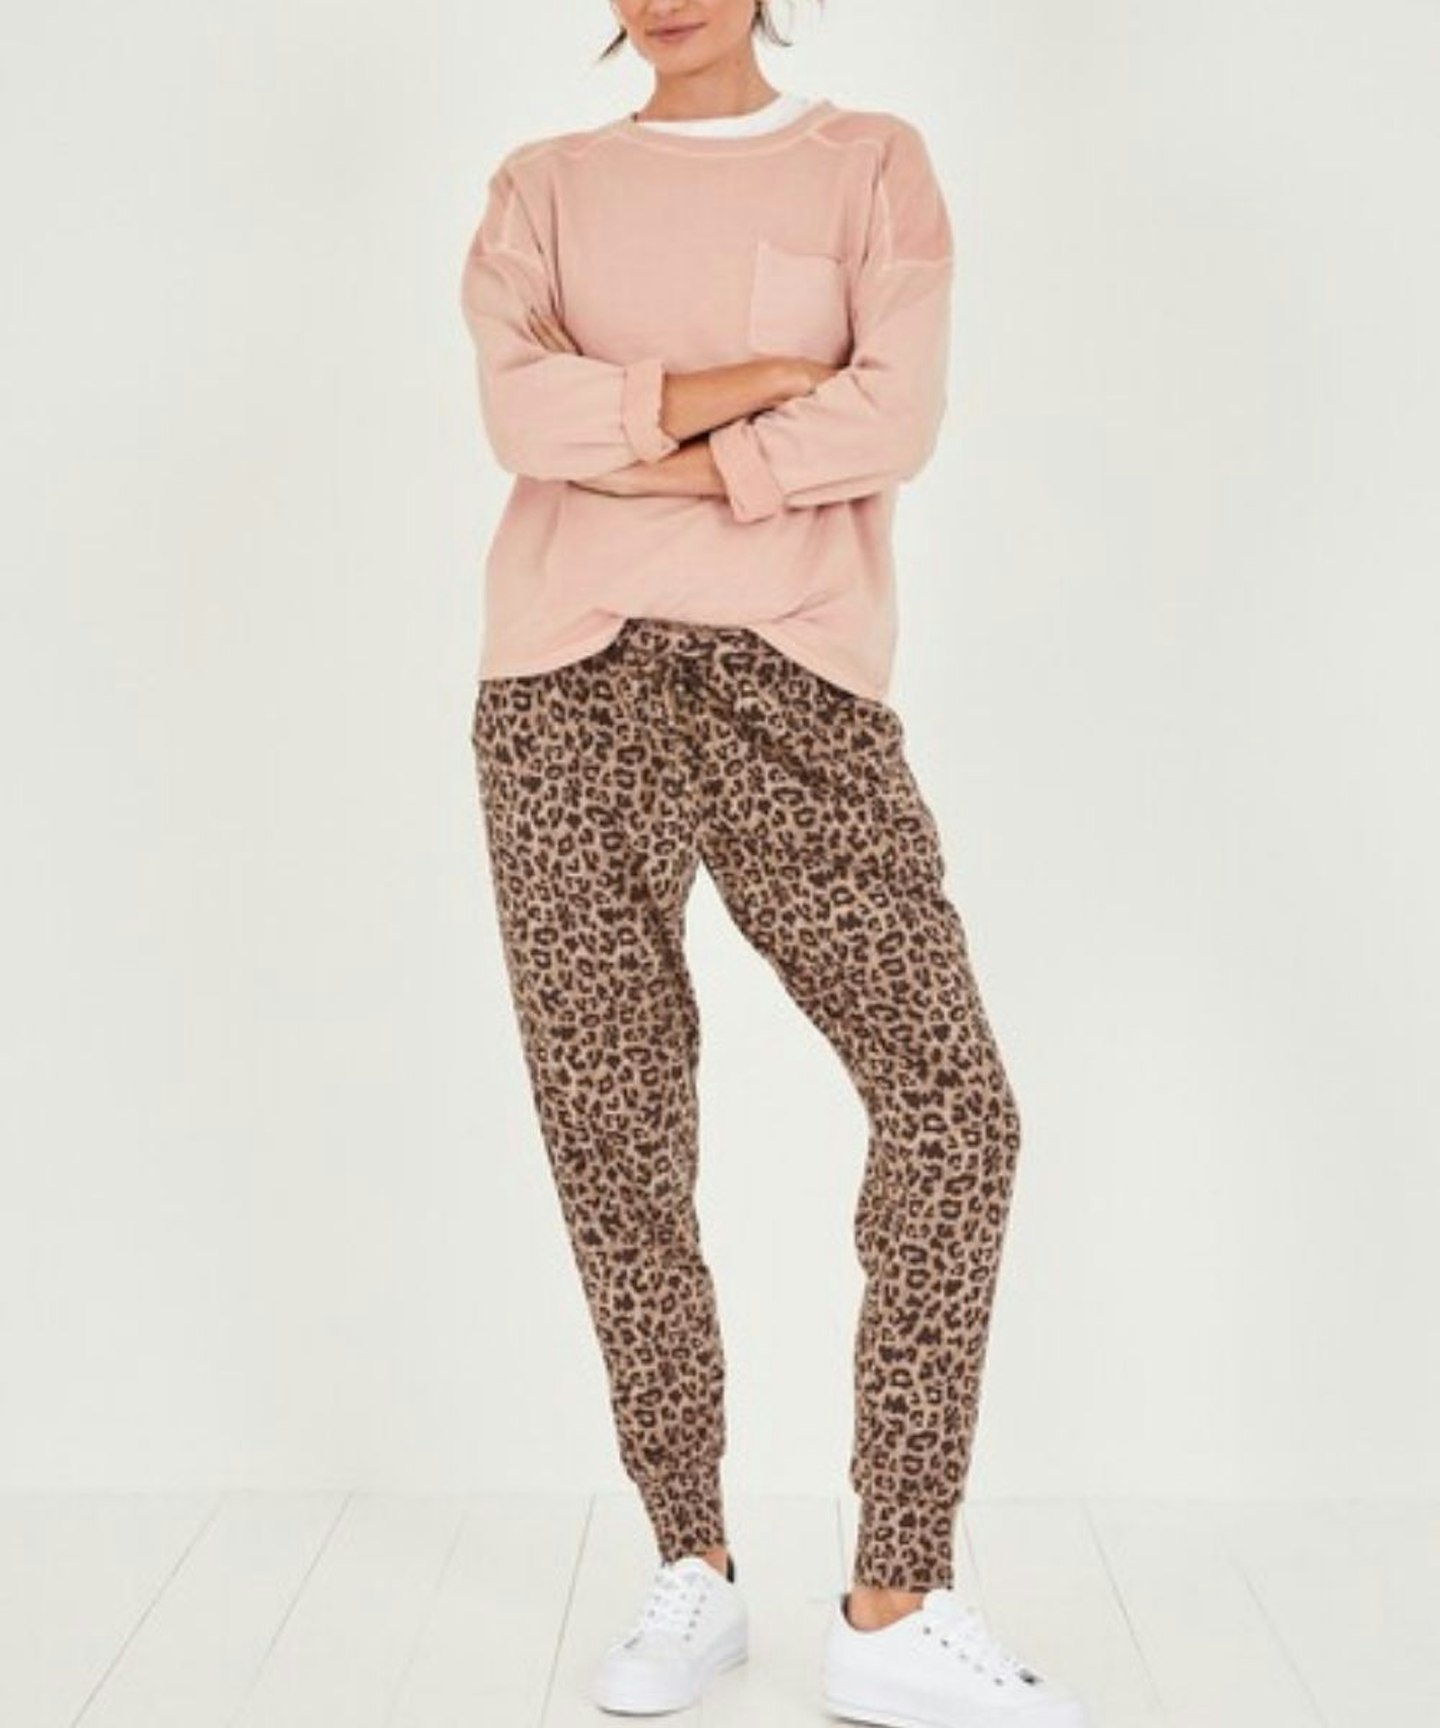 Amie Printed Jersey Joggers